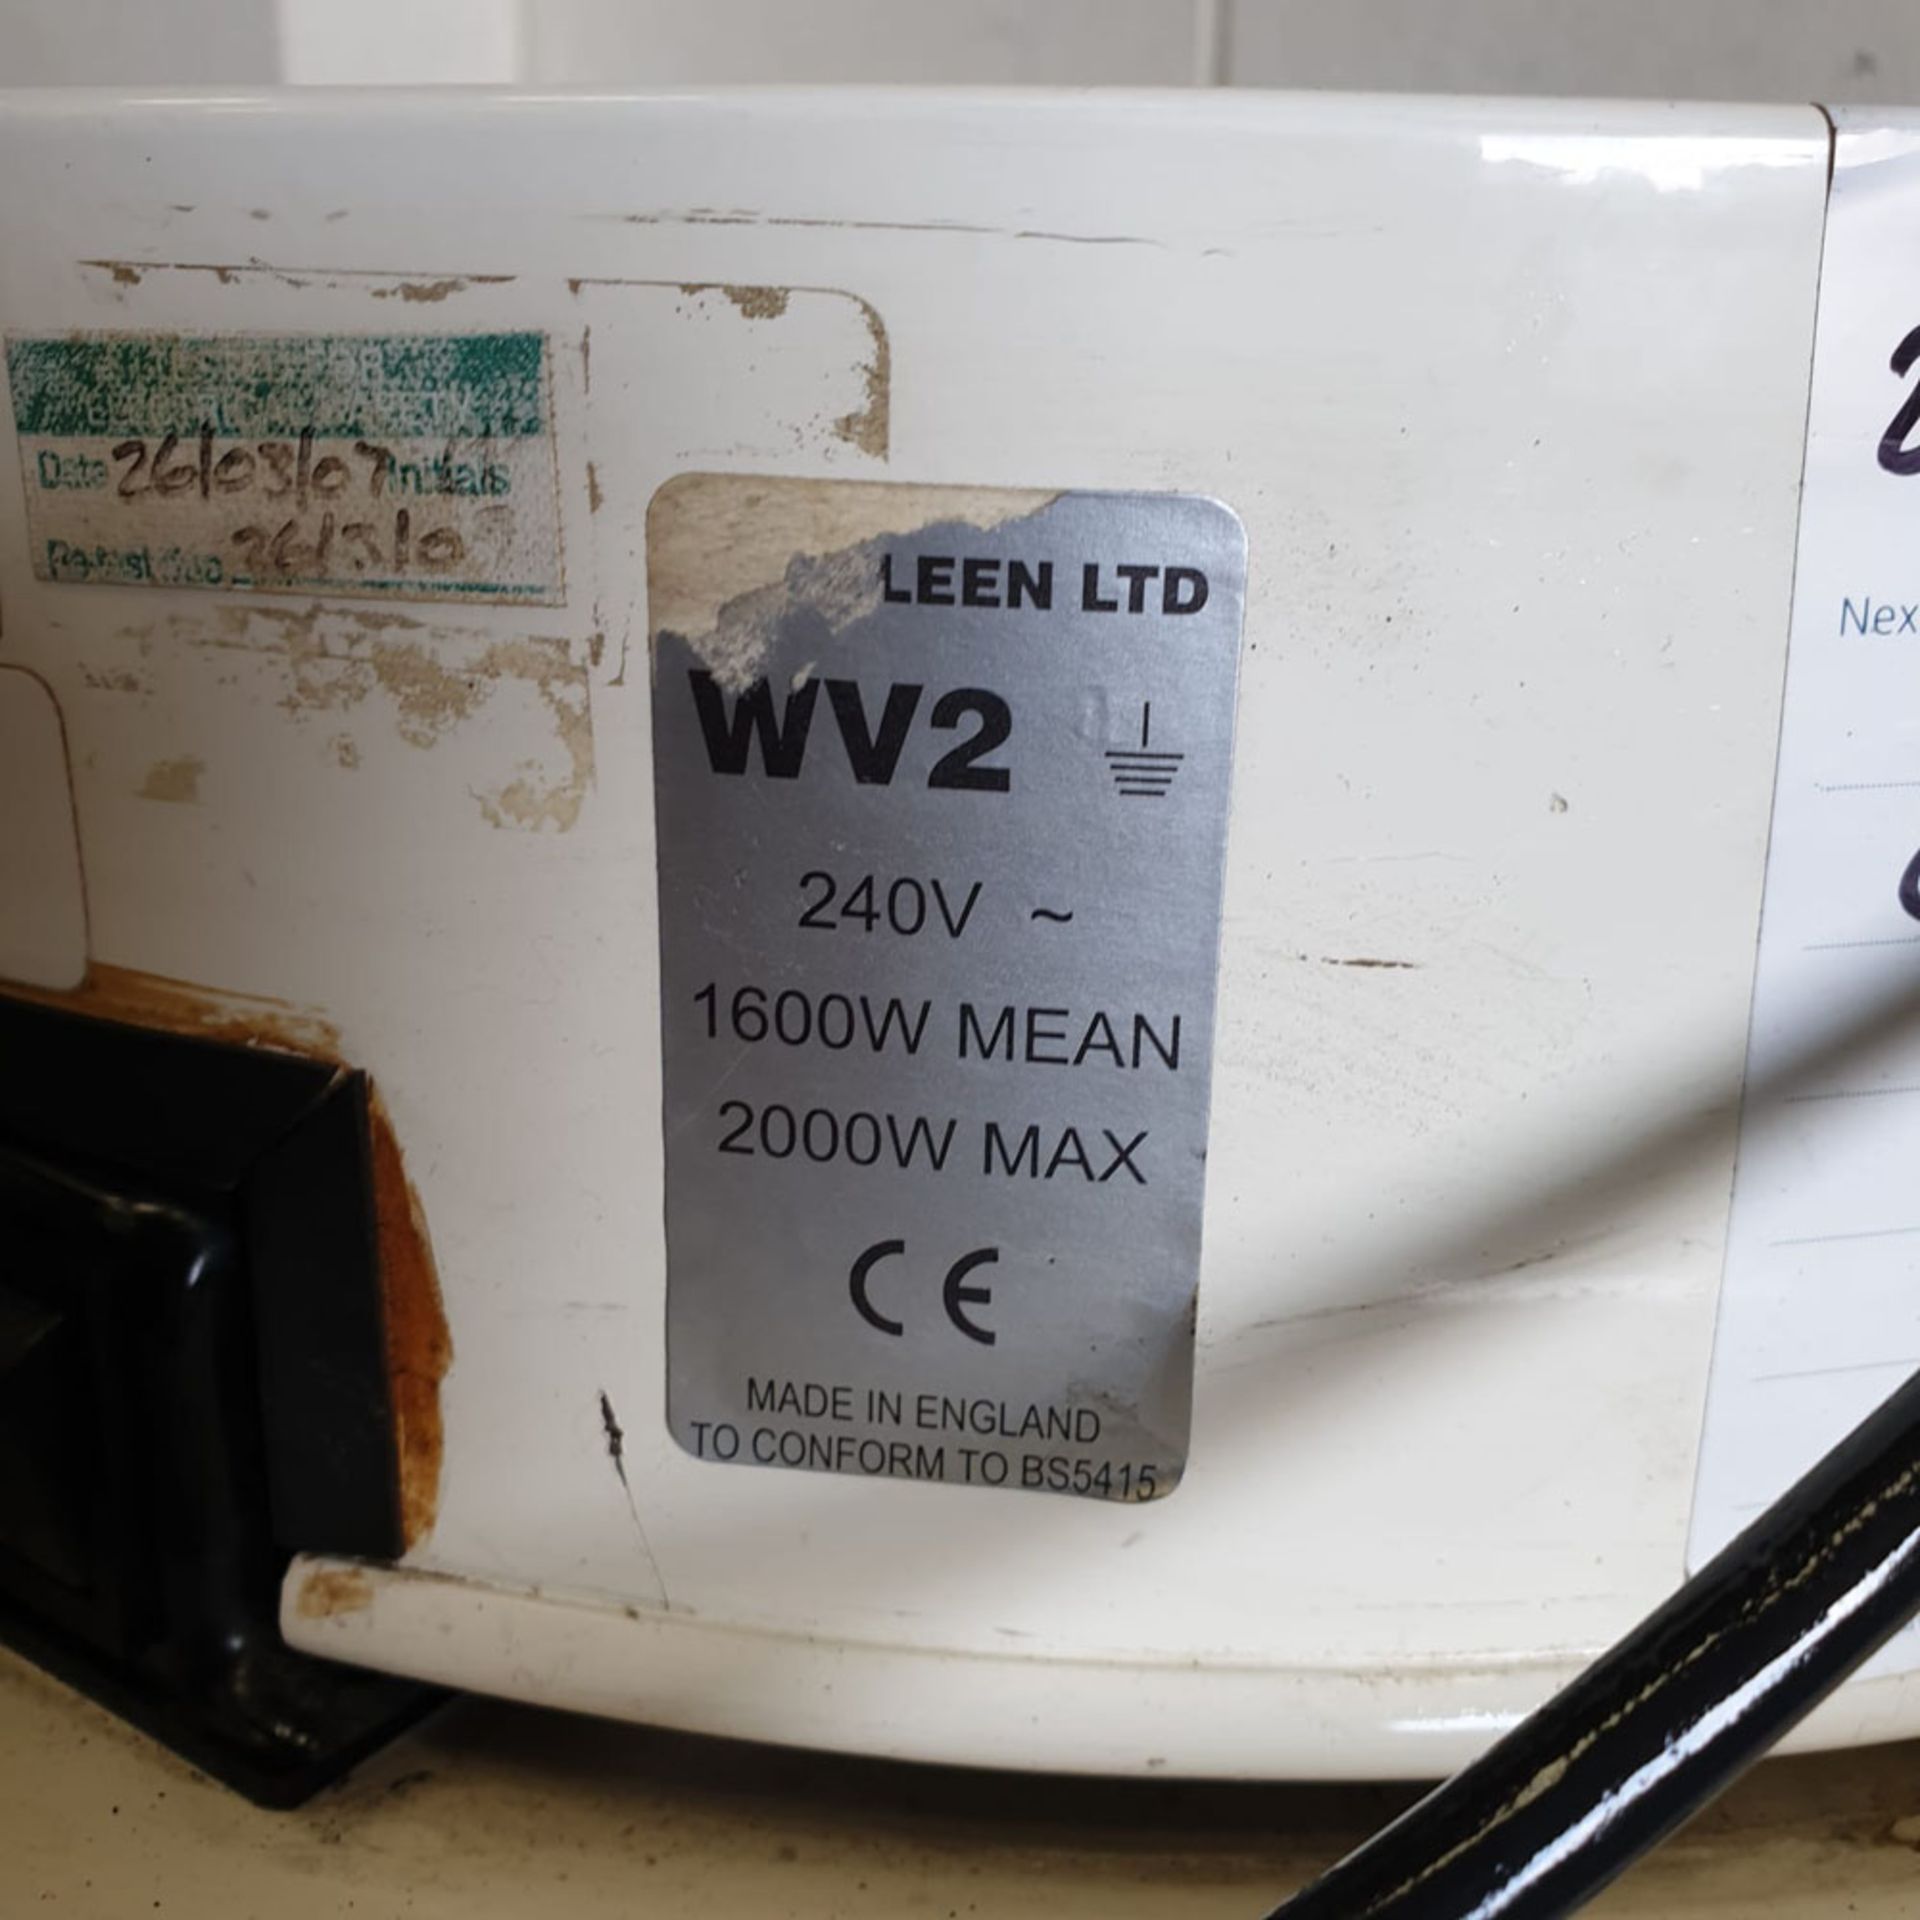 Axminster WV2 Dust Extractor. 240V. Max Power 2000W. - Image 5 of 5